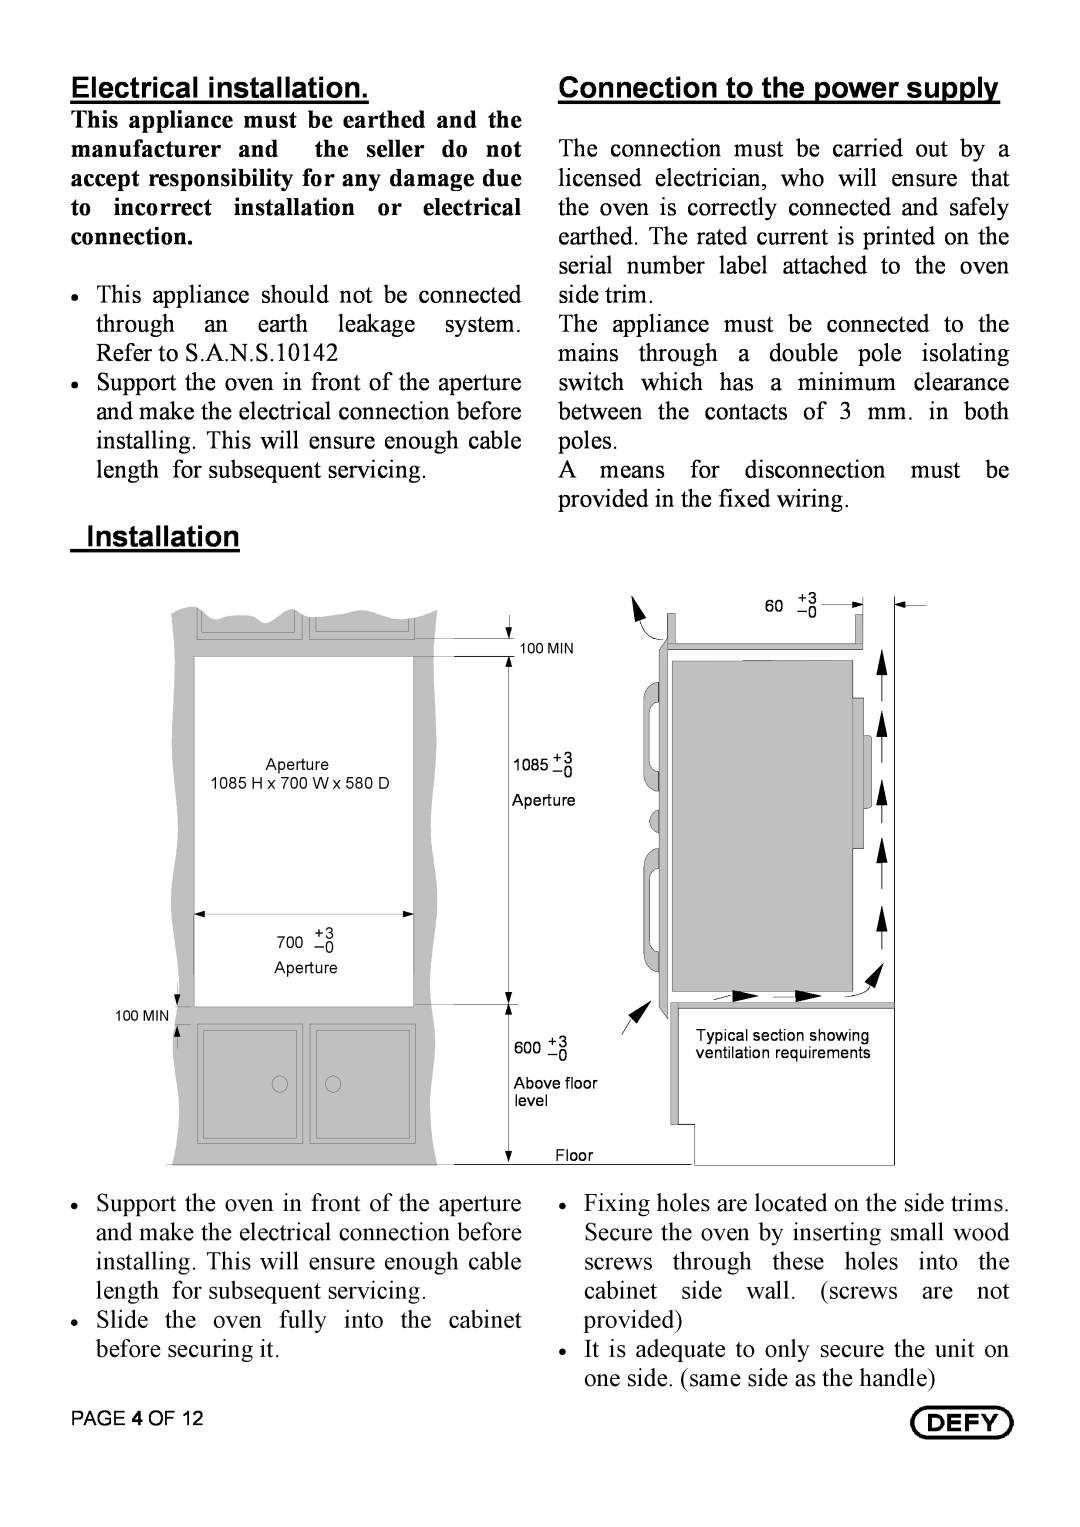 Defy Appliances DBO 435 Black owner manual Electrical installation, Connection to the power supply, Installation, PAGE 4 OF 